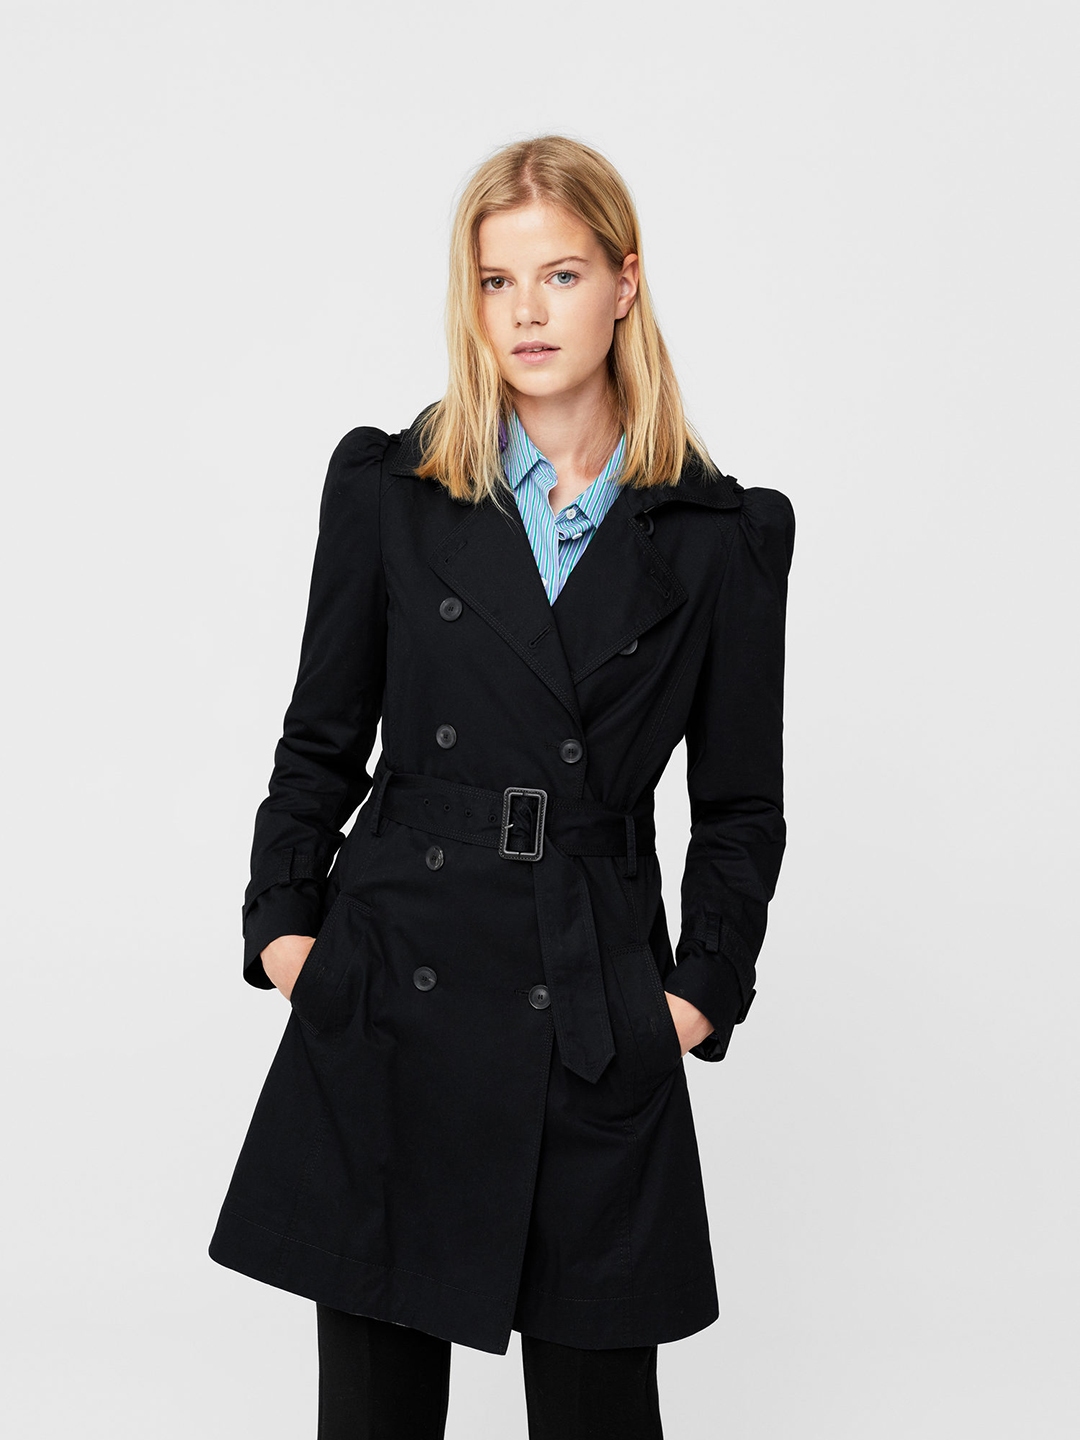 Buy Mango Black Double Breasted Trench Coat Coats For Women 2141920 Myntra